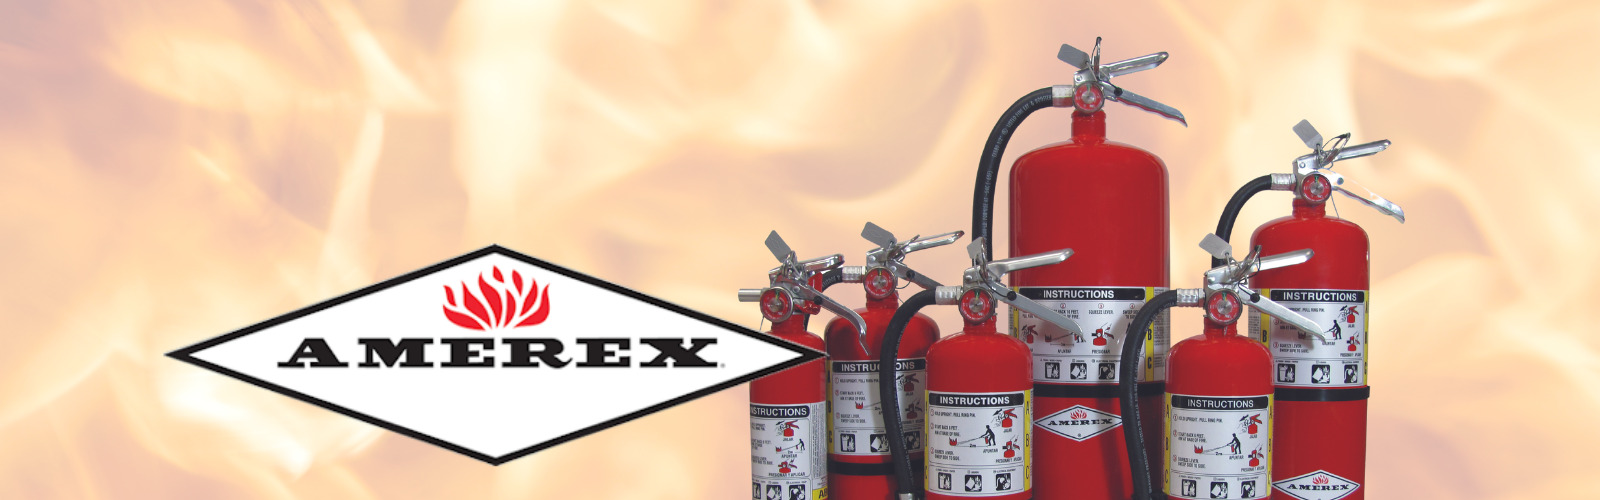 Amerex Fire Protection Products distributed by Koetter Fire Protection